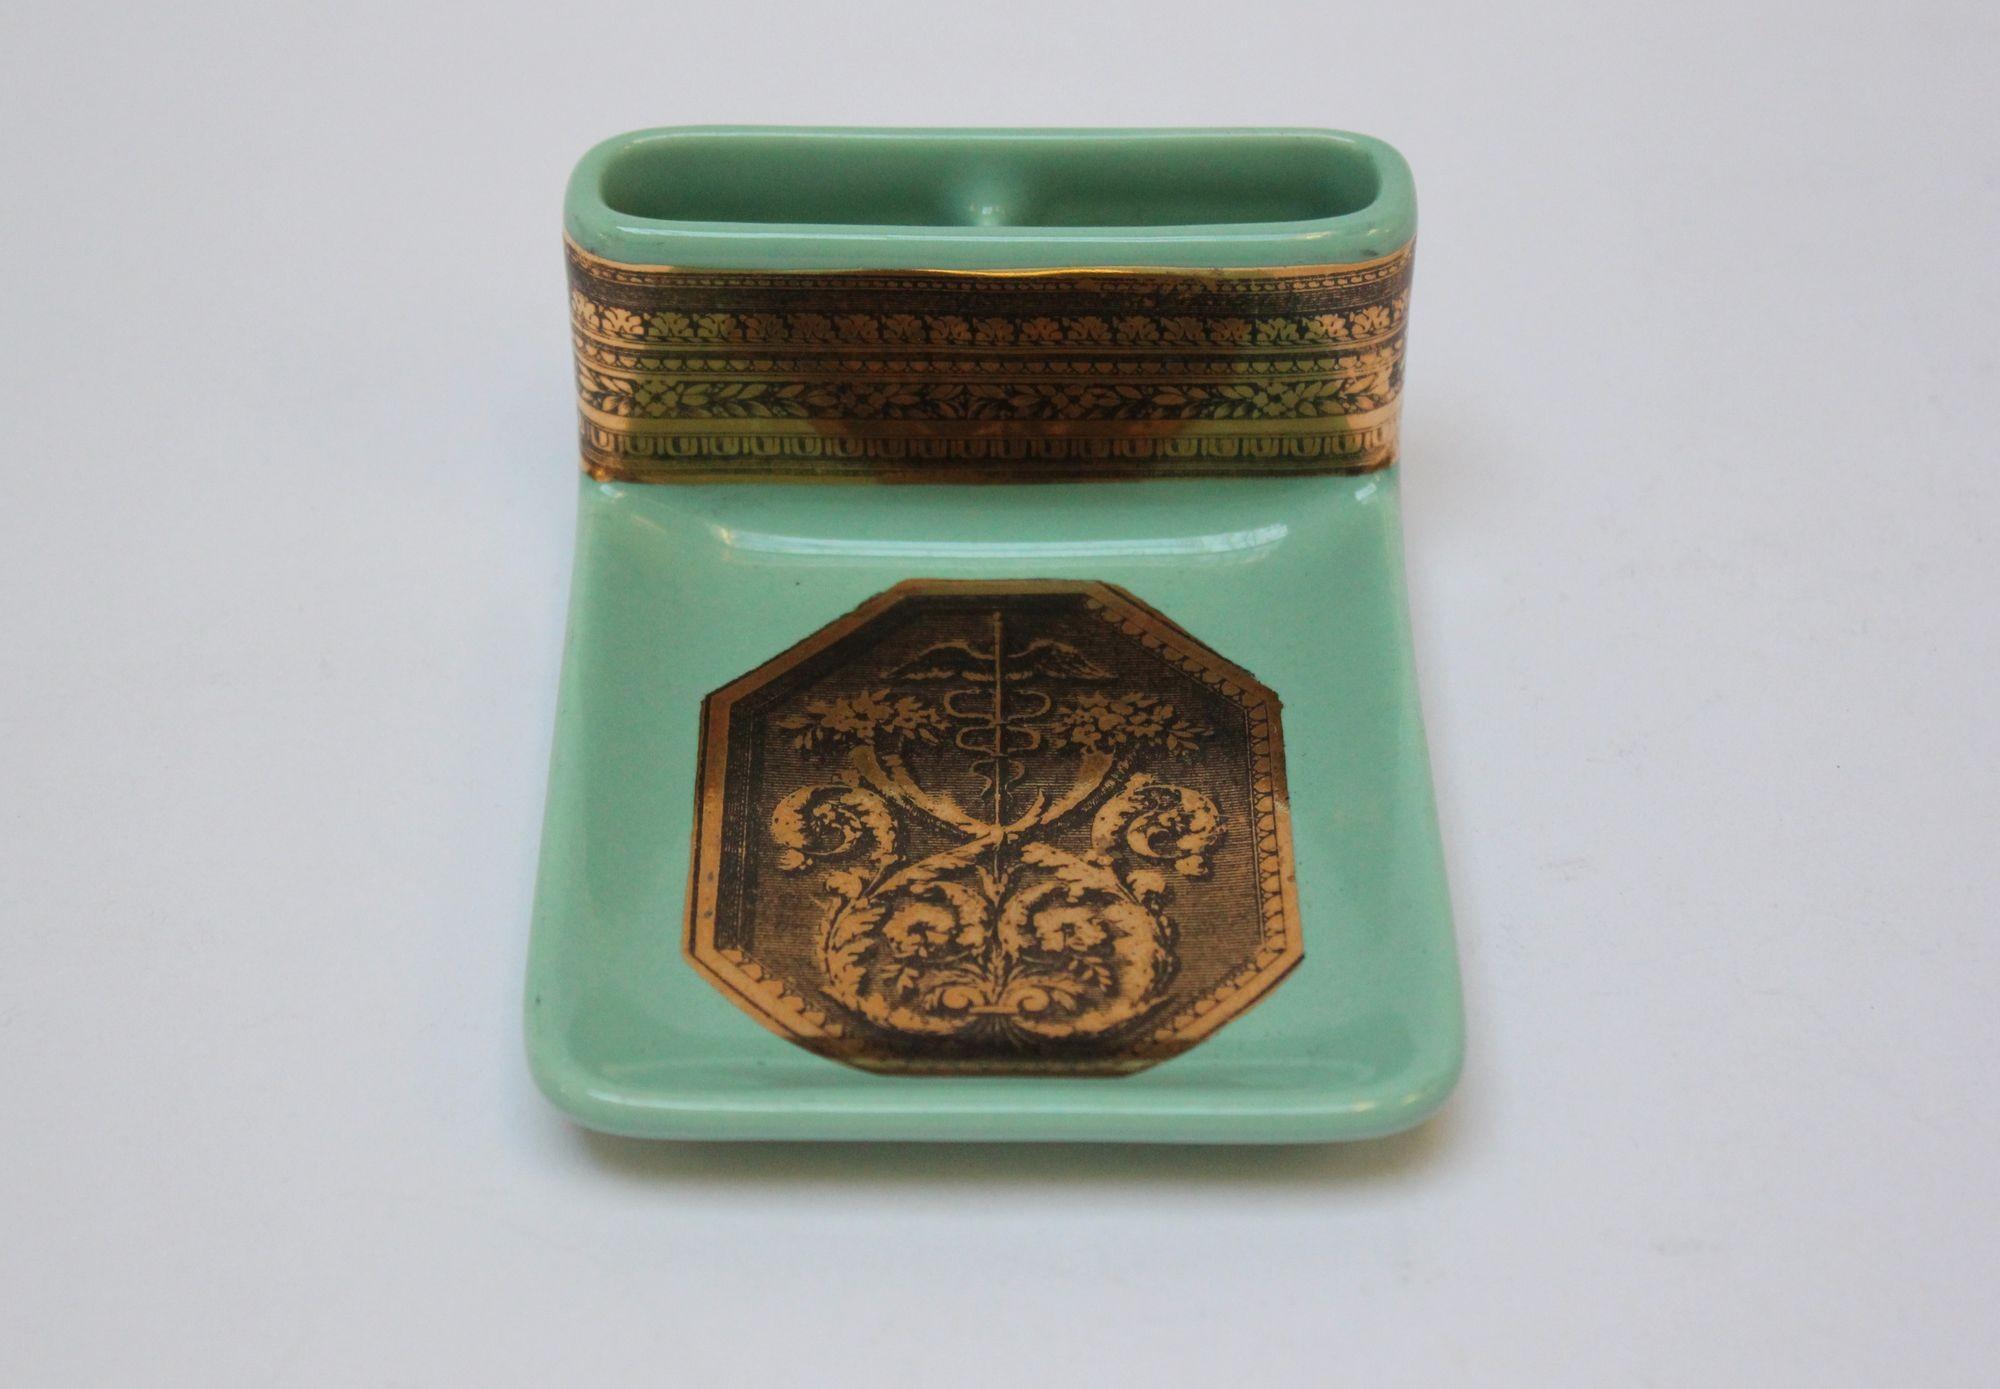 Vintage celadon/mint green ceramic ashtray/trinket dish with cigarette slots by Piero Fornasetti, (circa 1950s, Italy). Features lithographic transfer and gilt on porcelain - the pattern depicting a caduceus amid a bouquet of flowers and acanthus